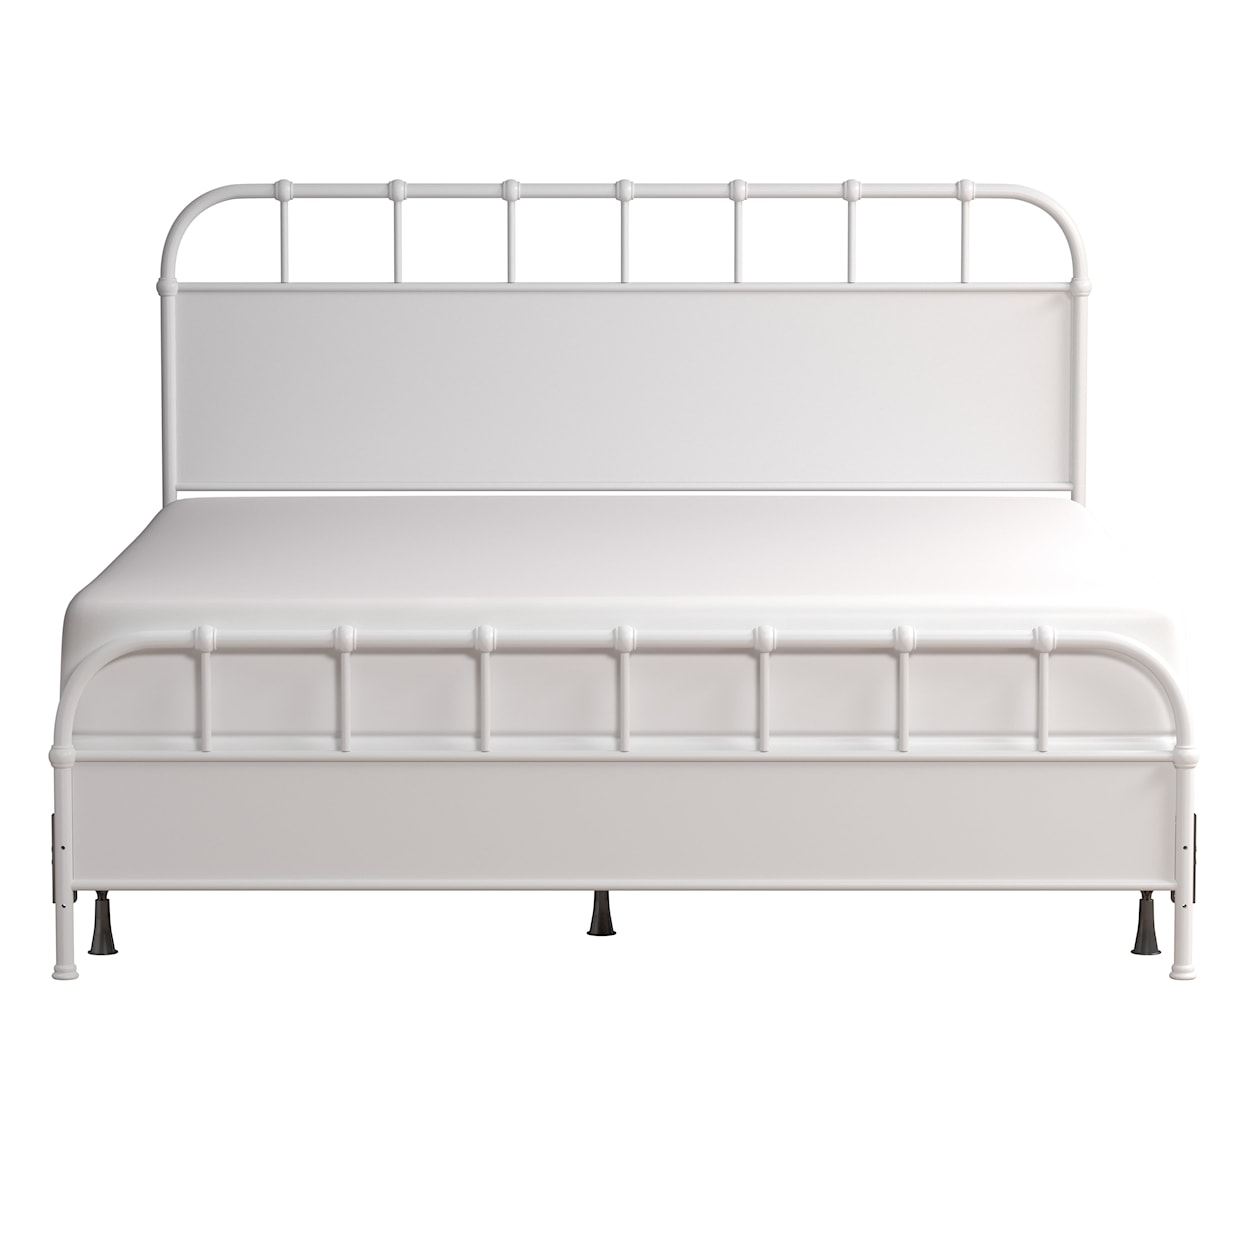 Hillsdale Grayson King Bed